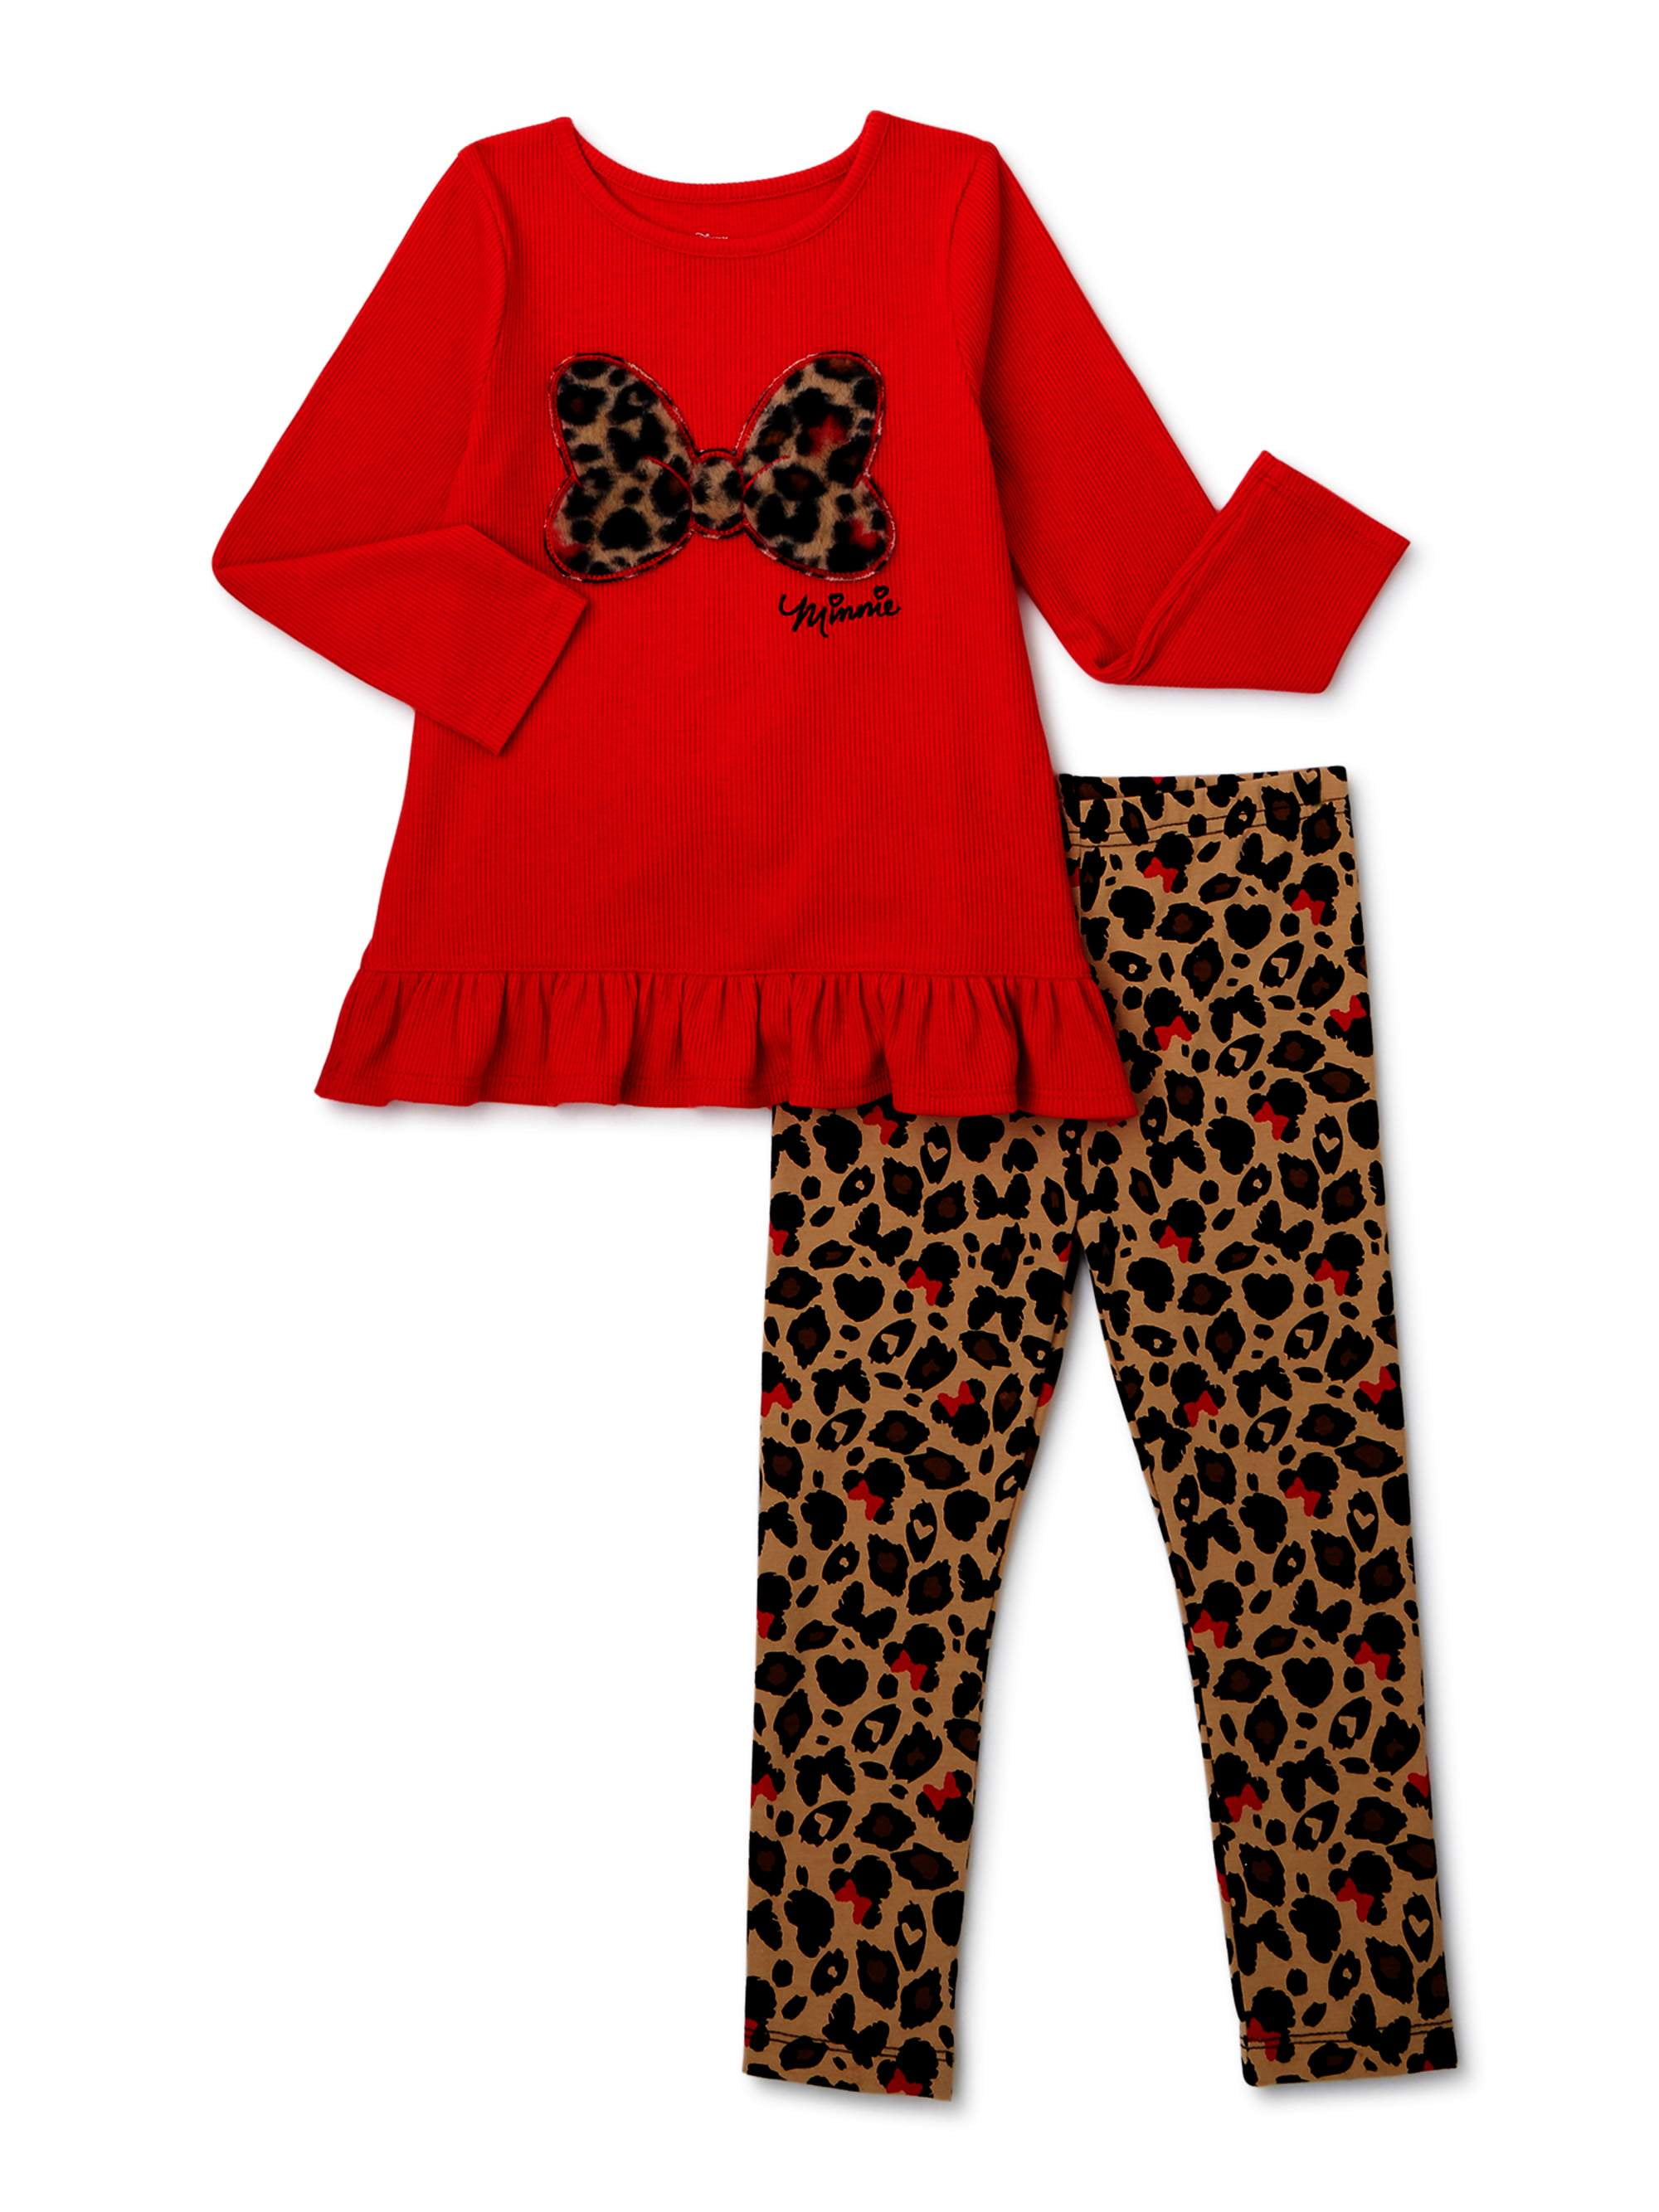 Minnie Mouse Embroidered Shirt Leopard Ruffle Shorts